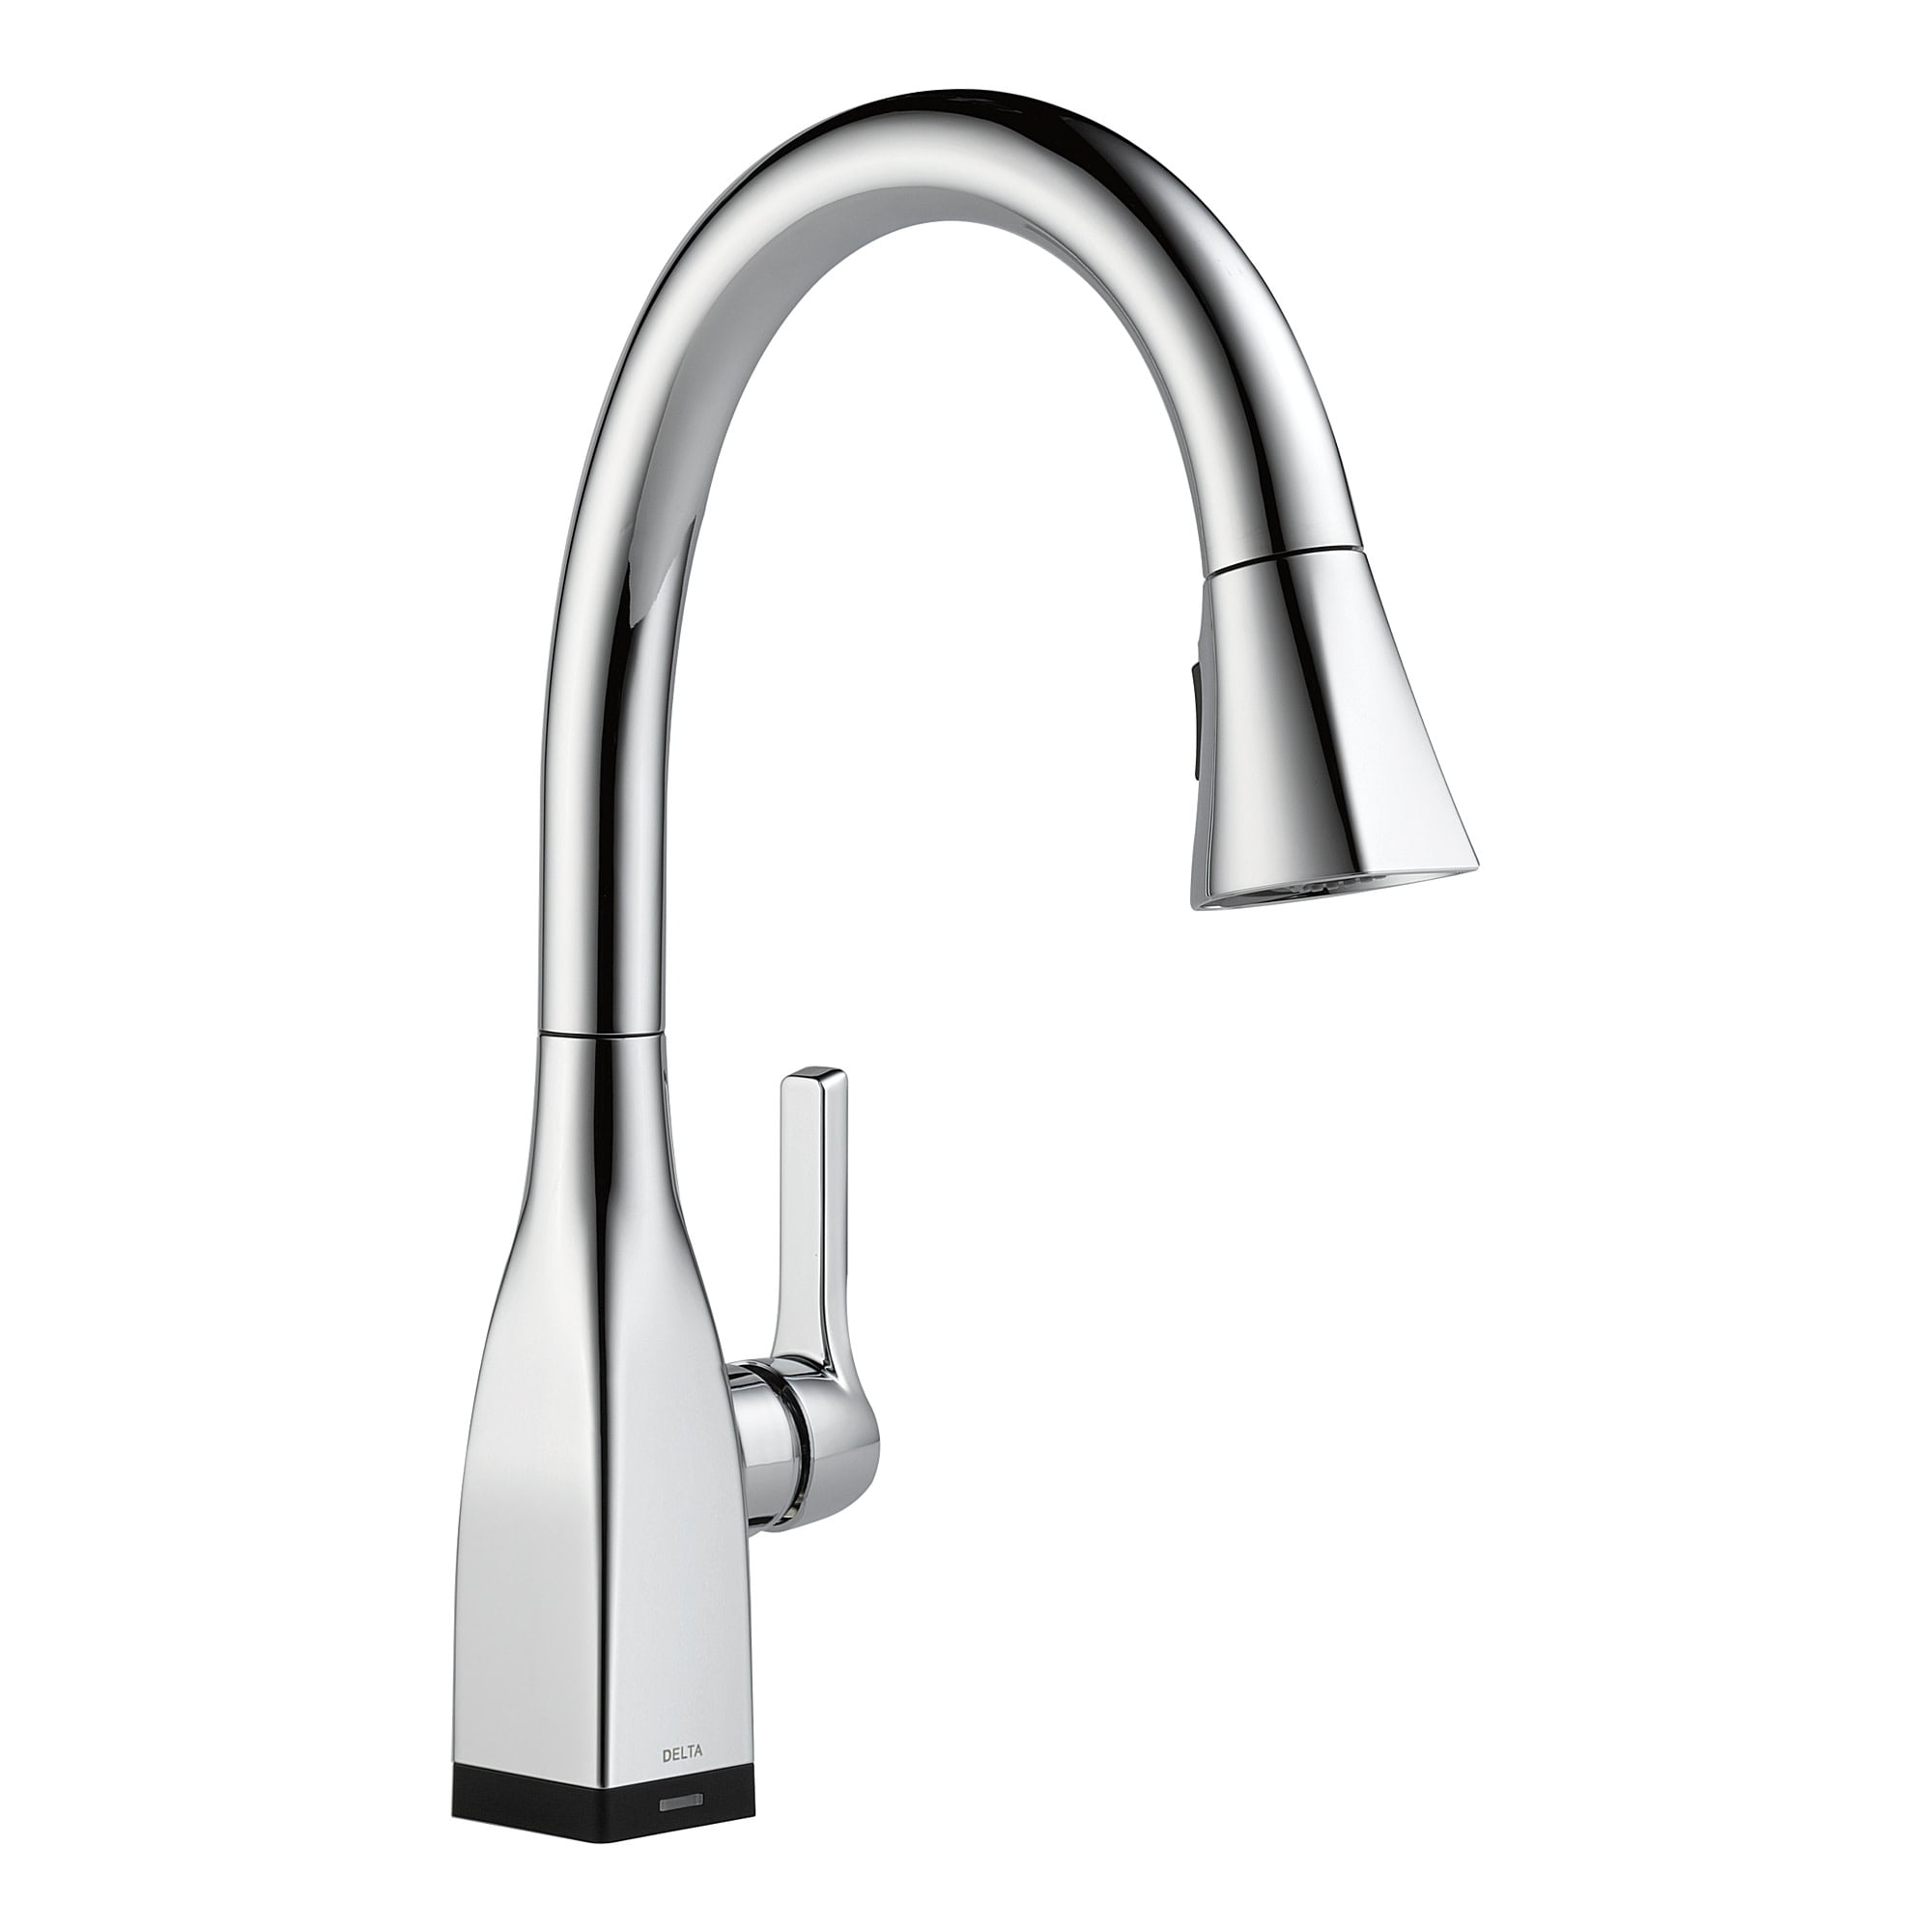 Delta Mateo Single Handle Pull-Down Kitchen Faucet with ...